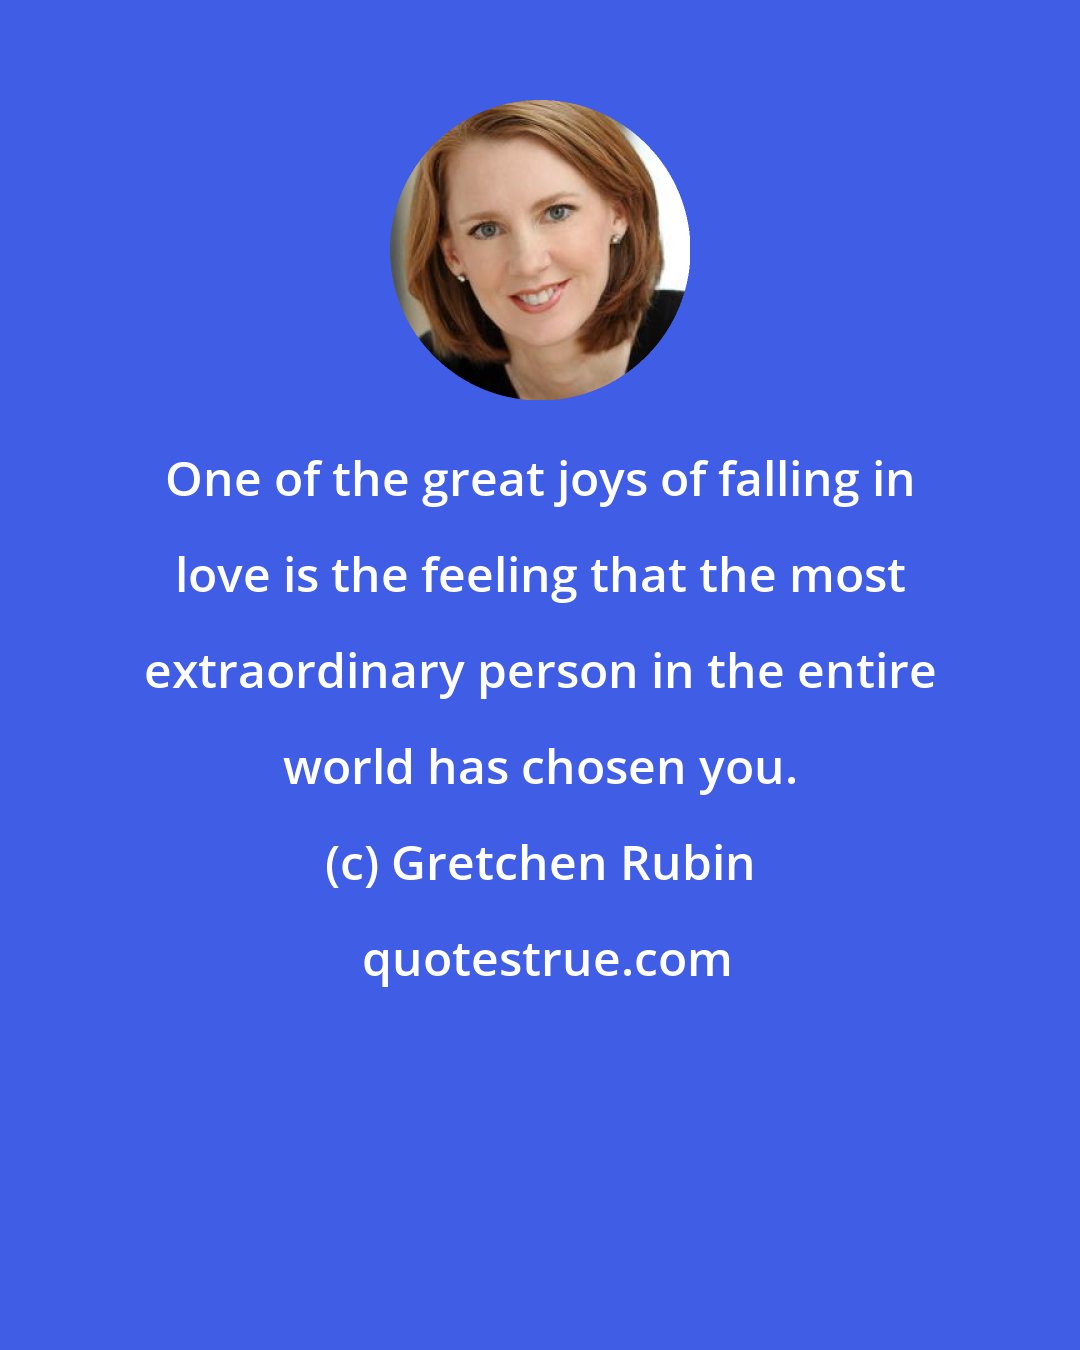 Gretchen Rubin: One of the great joys of falling in love is the feeling that the most extraordinary person in the entire world has chosen you.